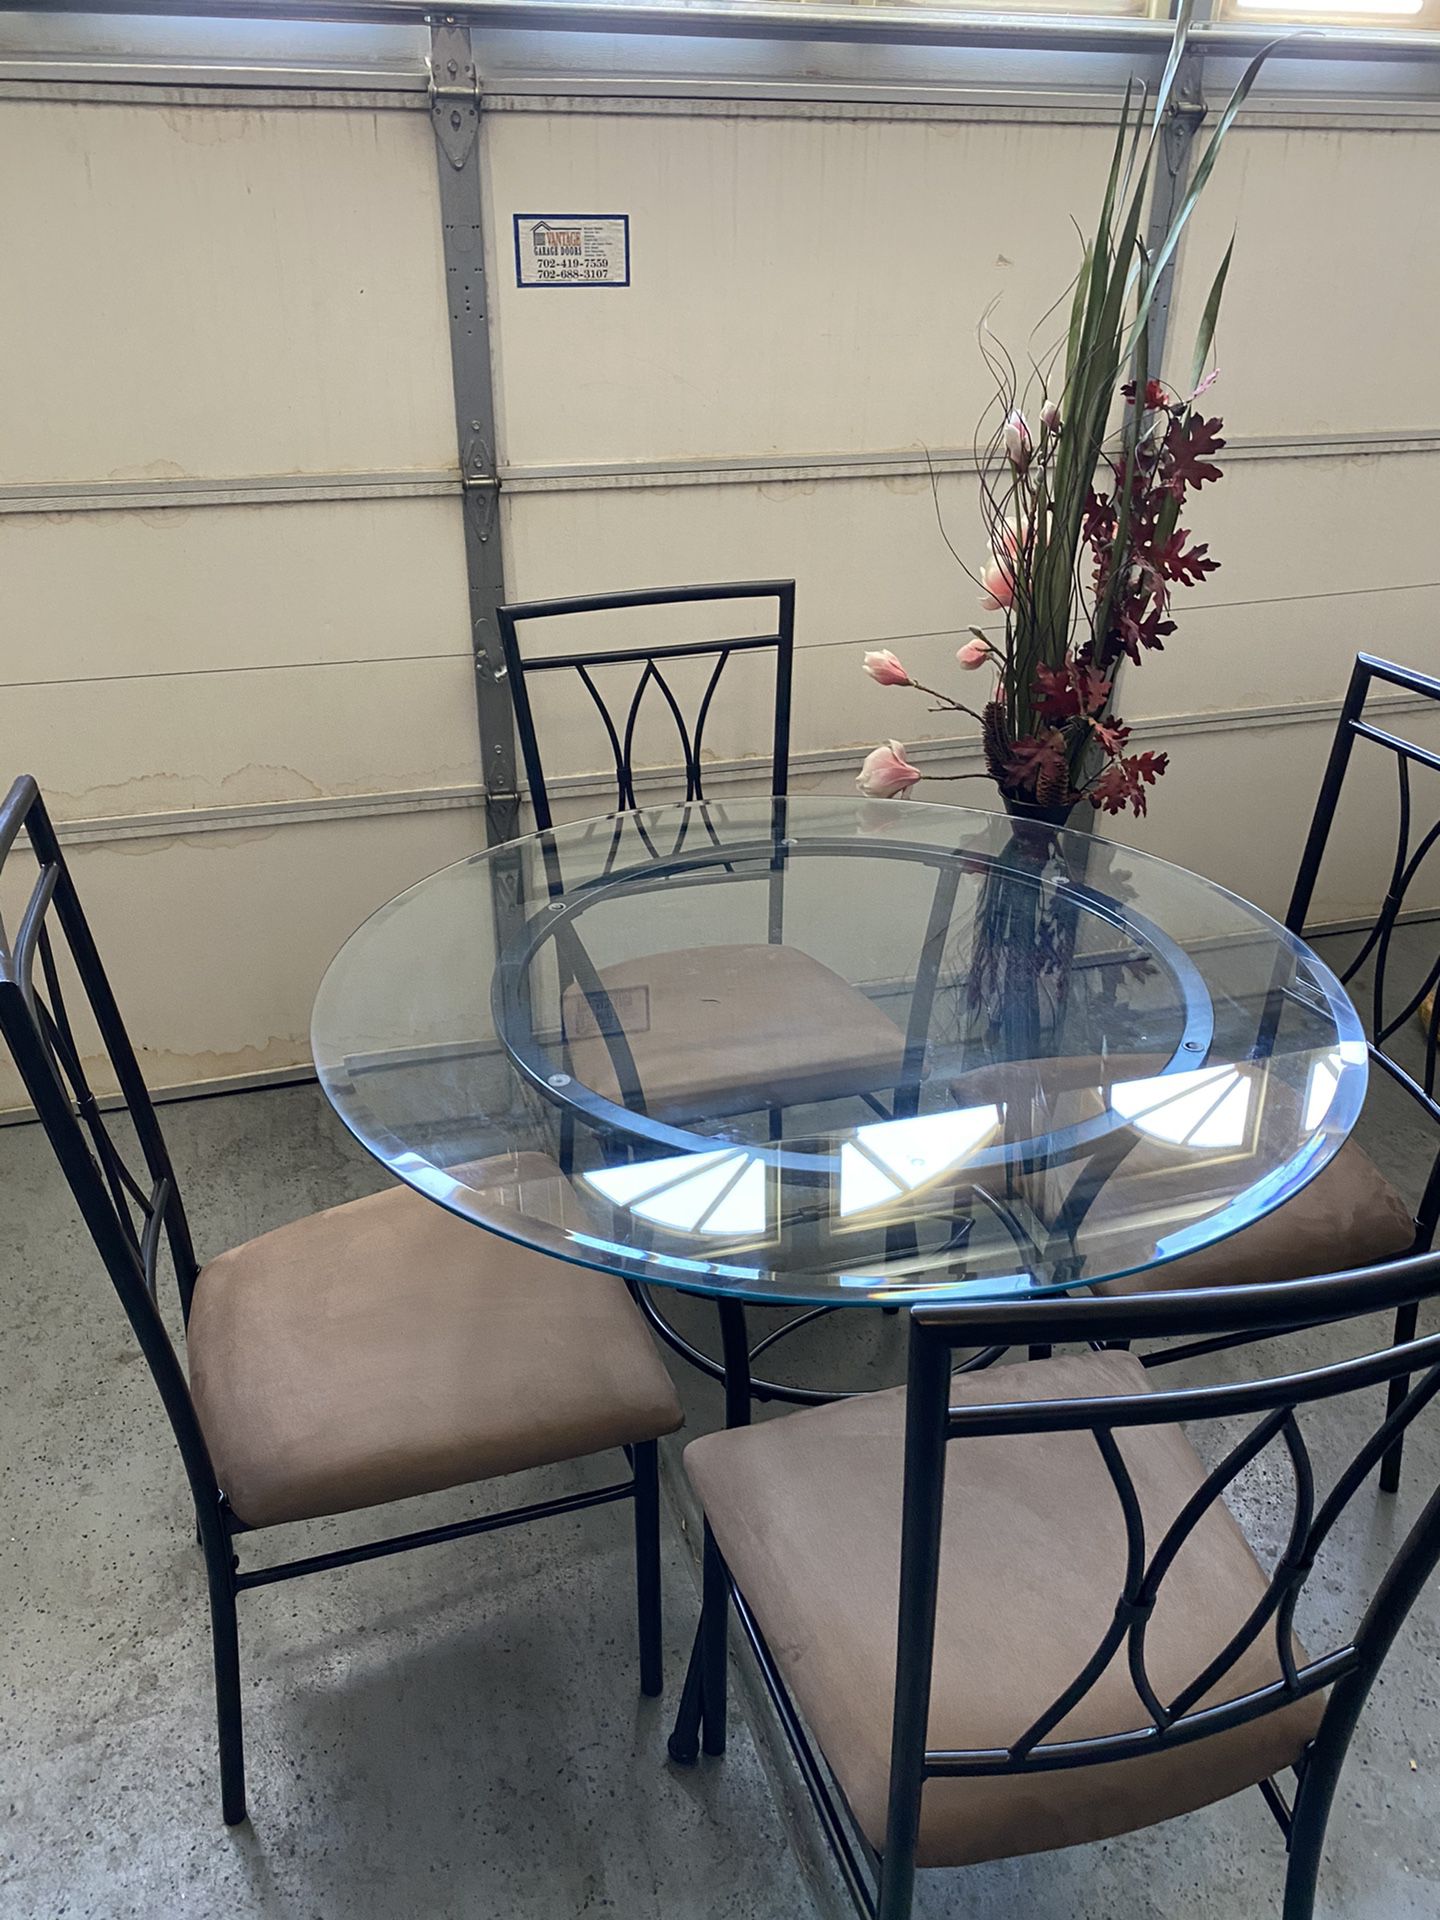 42” round glass dining table with 4 chairs- New